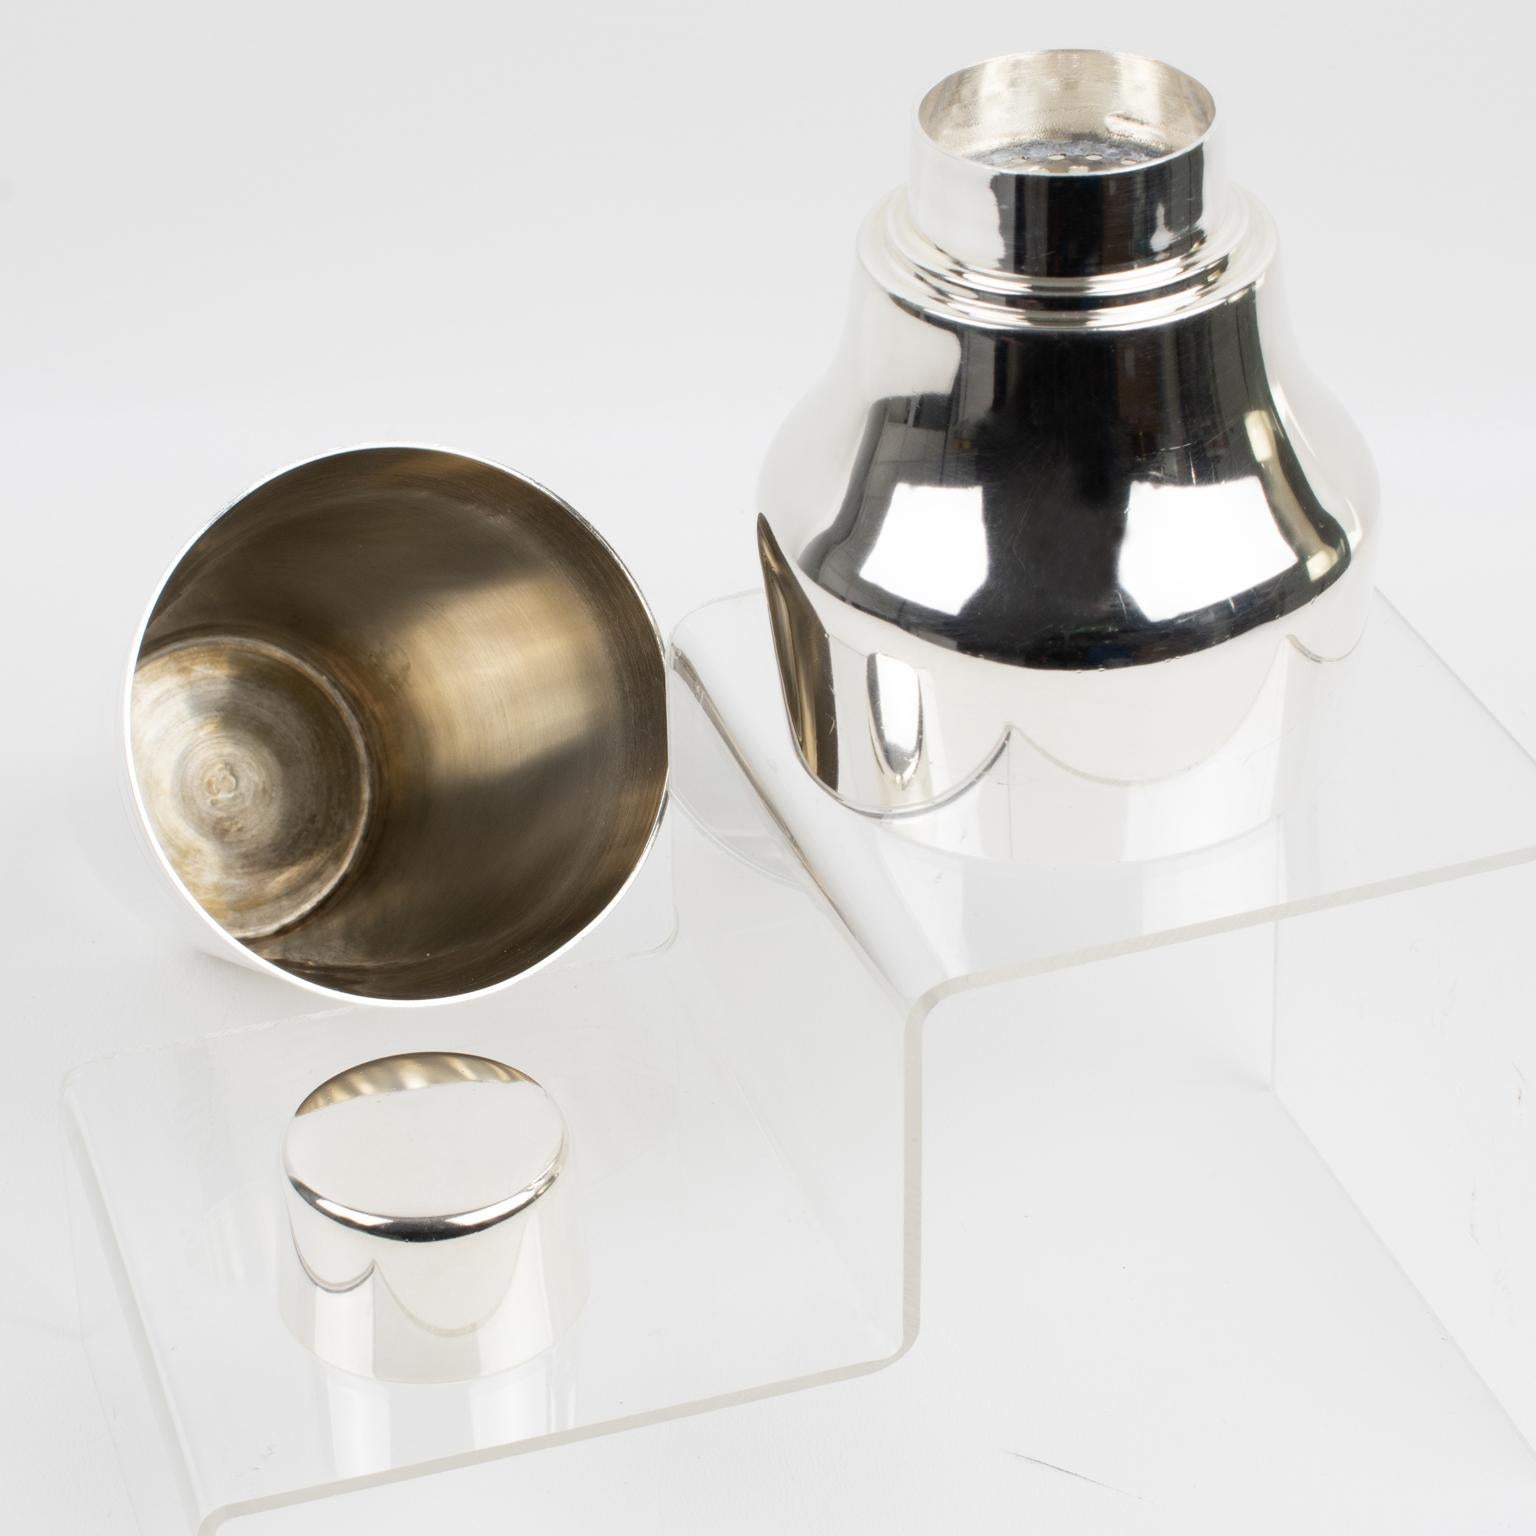 Mid-20th Century French Art Deco Silver Plate Cocktail Shaker by Alois Straszak for Le Crabe